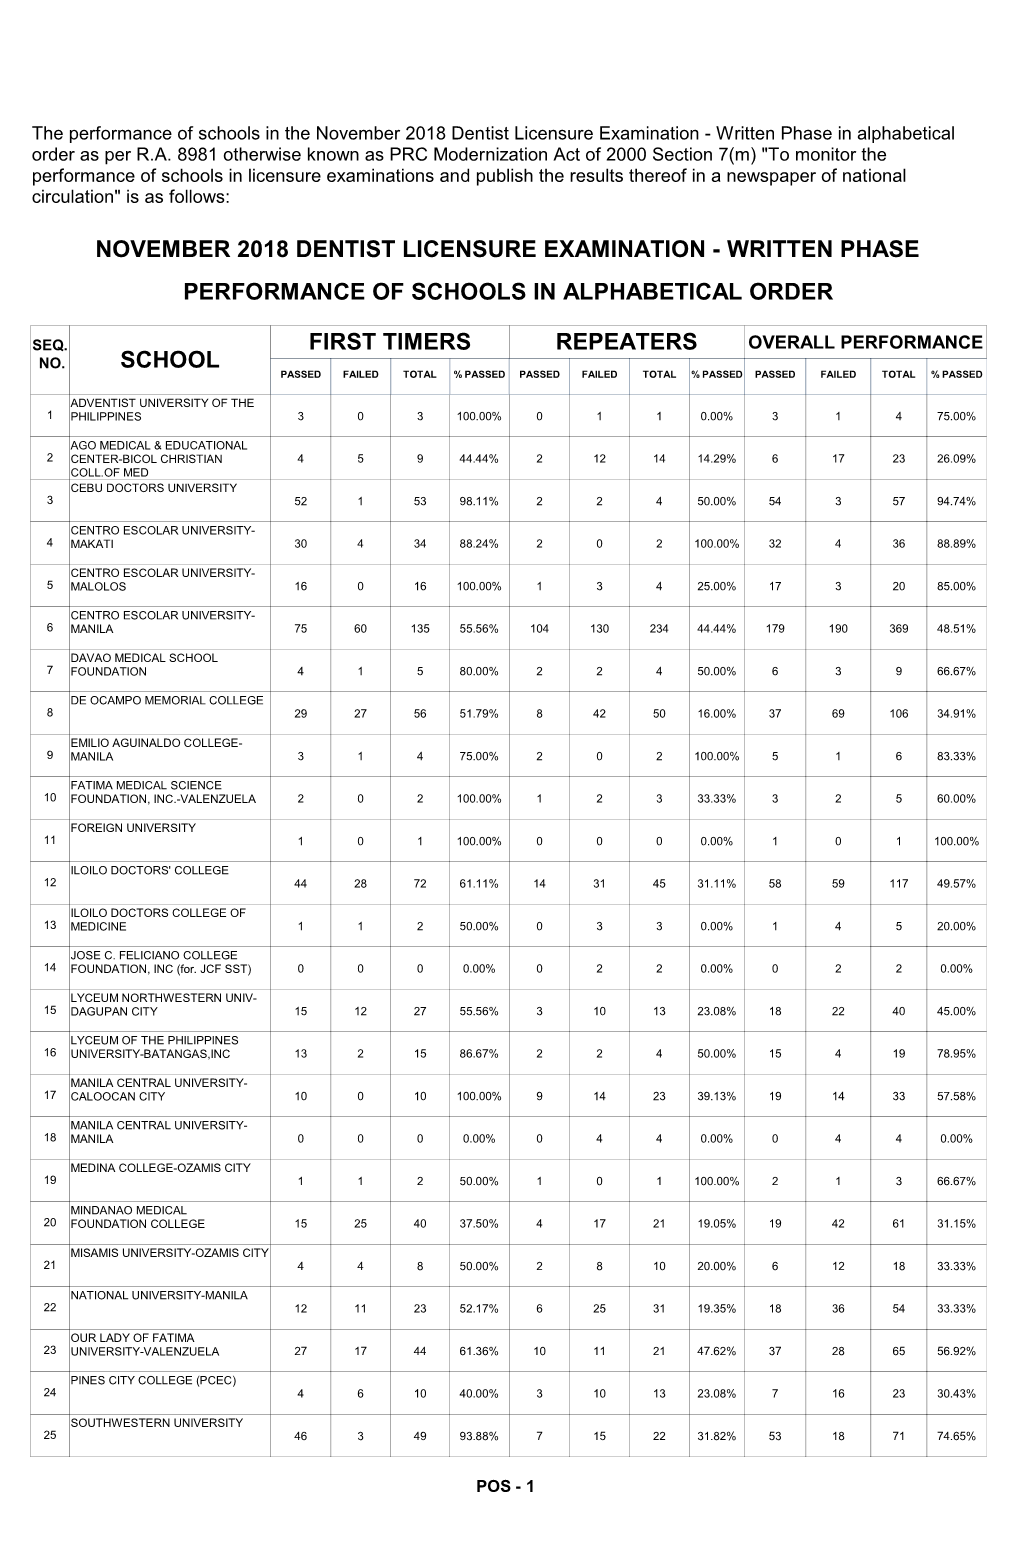 Repeaters First Timers School Performance of Schools in Alphabetical Order November 2018 Dentist Licensure Examination